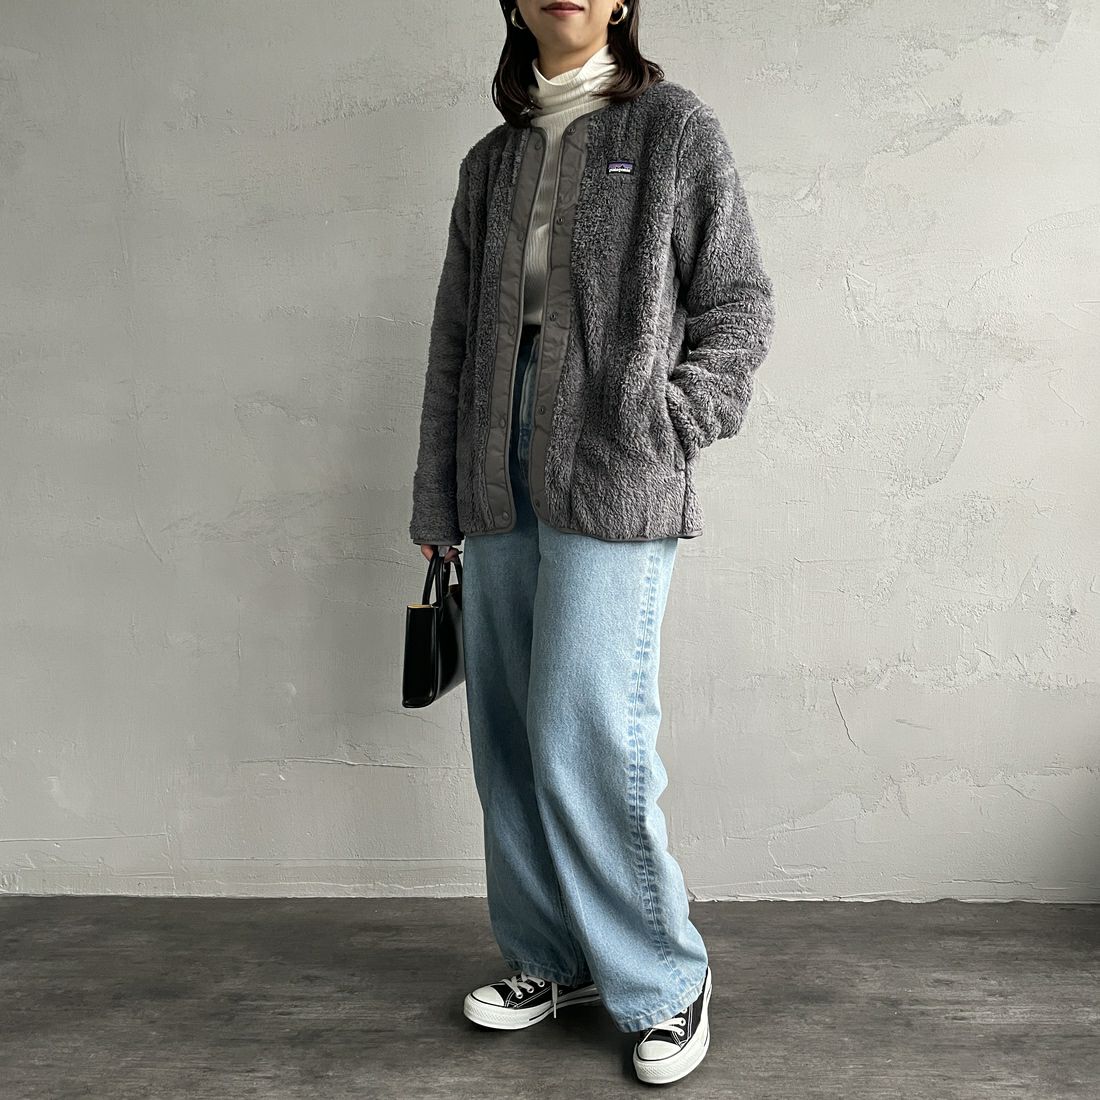 patagonia [パタゴニア] キッズ ロス ガトス カーディガン [65440]｜ジーンズファクトリー公式通販サイト - JEANS  FACTORY Online Shop